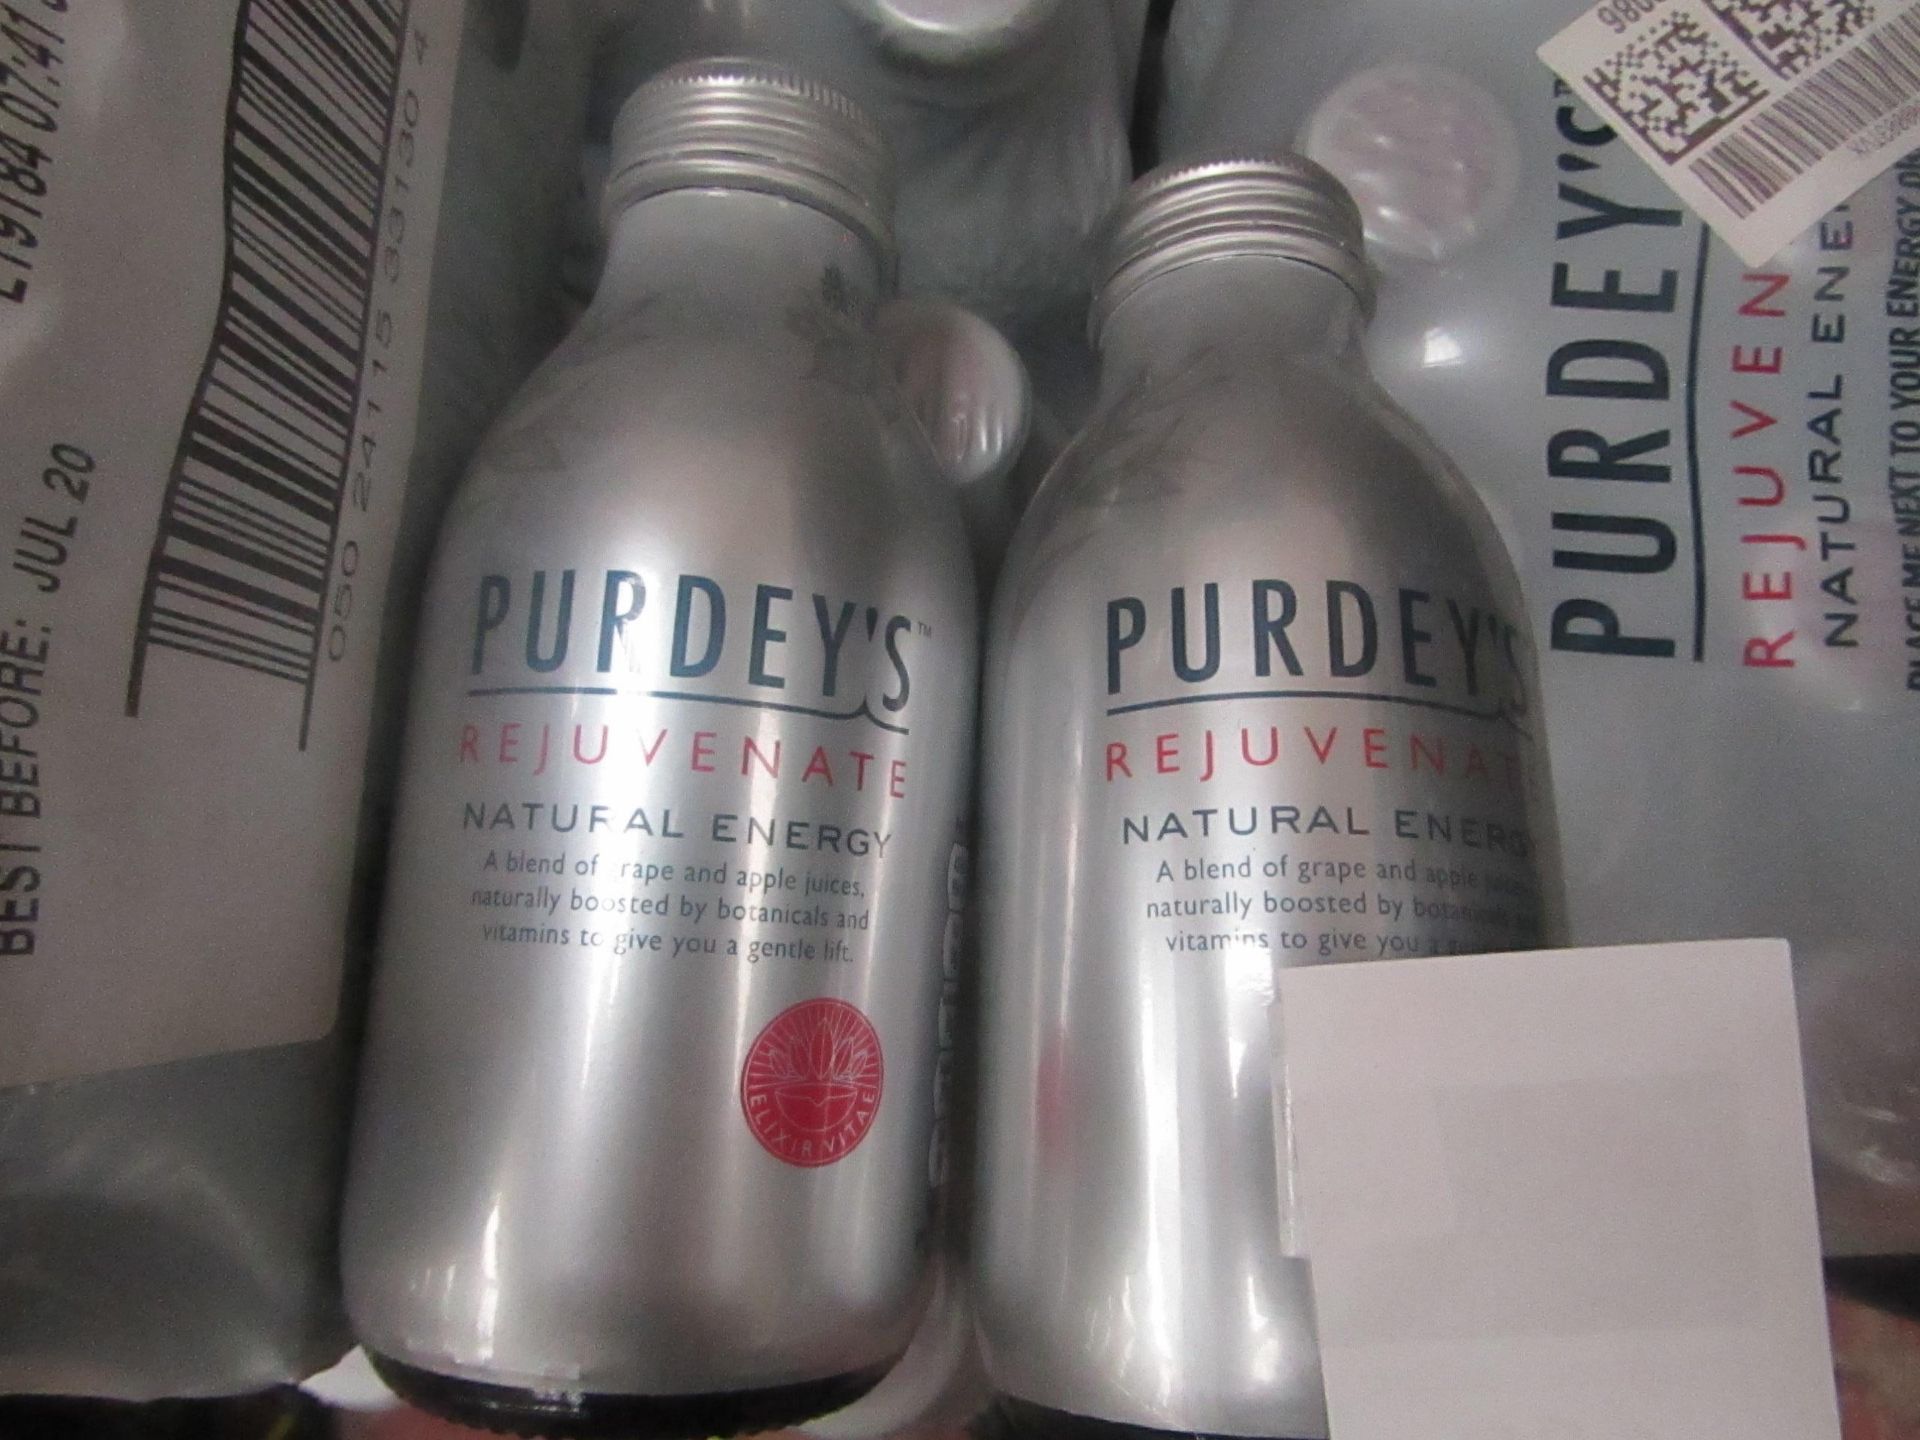 2 x Packs of 12 Being : Purdey's - Rejuvenate Natural Energy (Grape & Apple Flavoured Juice) - BBD